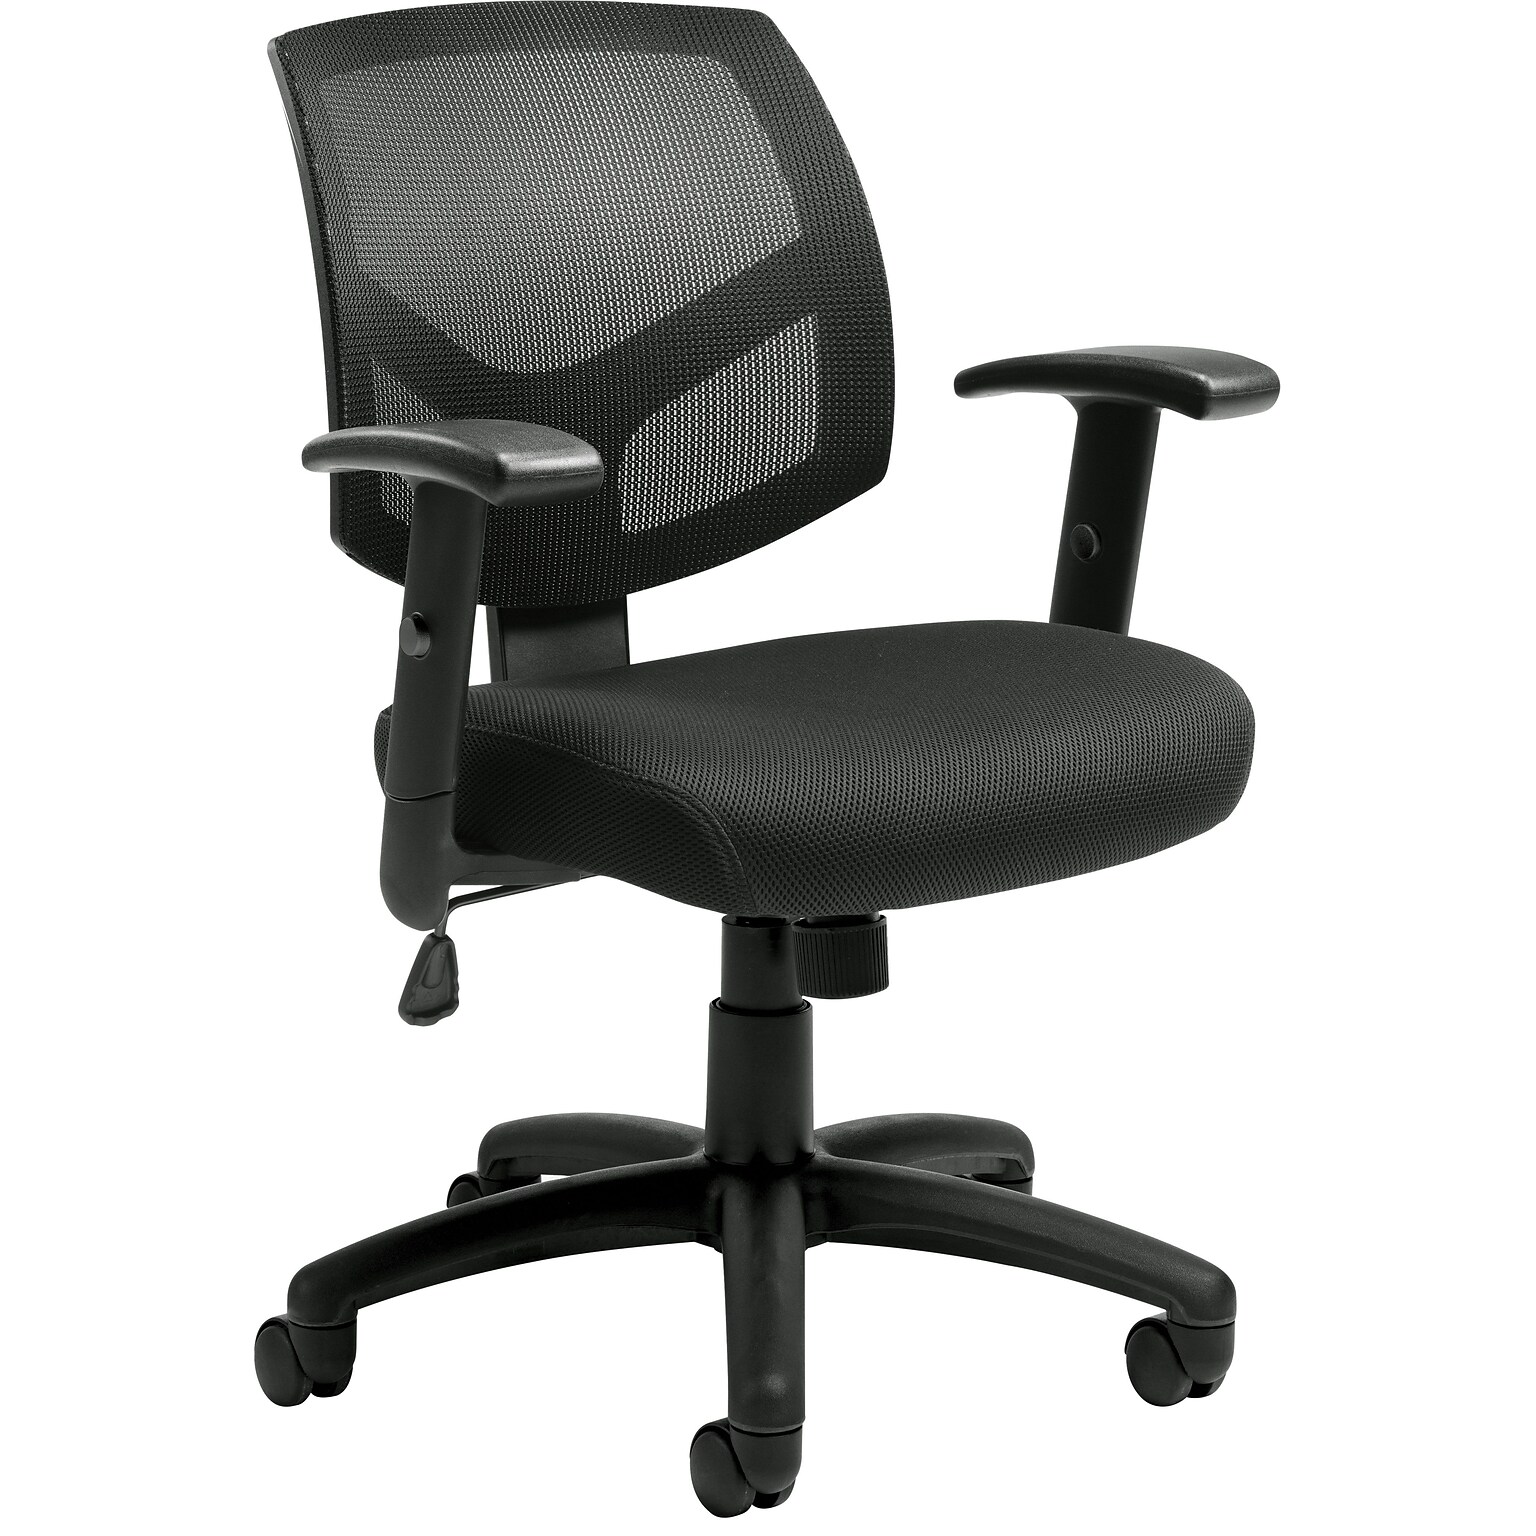 Offices To Go Mesh Back Managers Chair, Black, Adjustable Arms (OTG11514B)